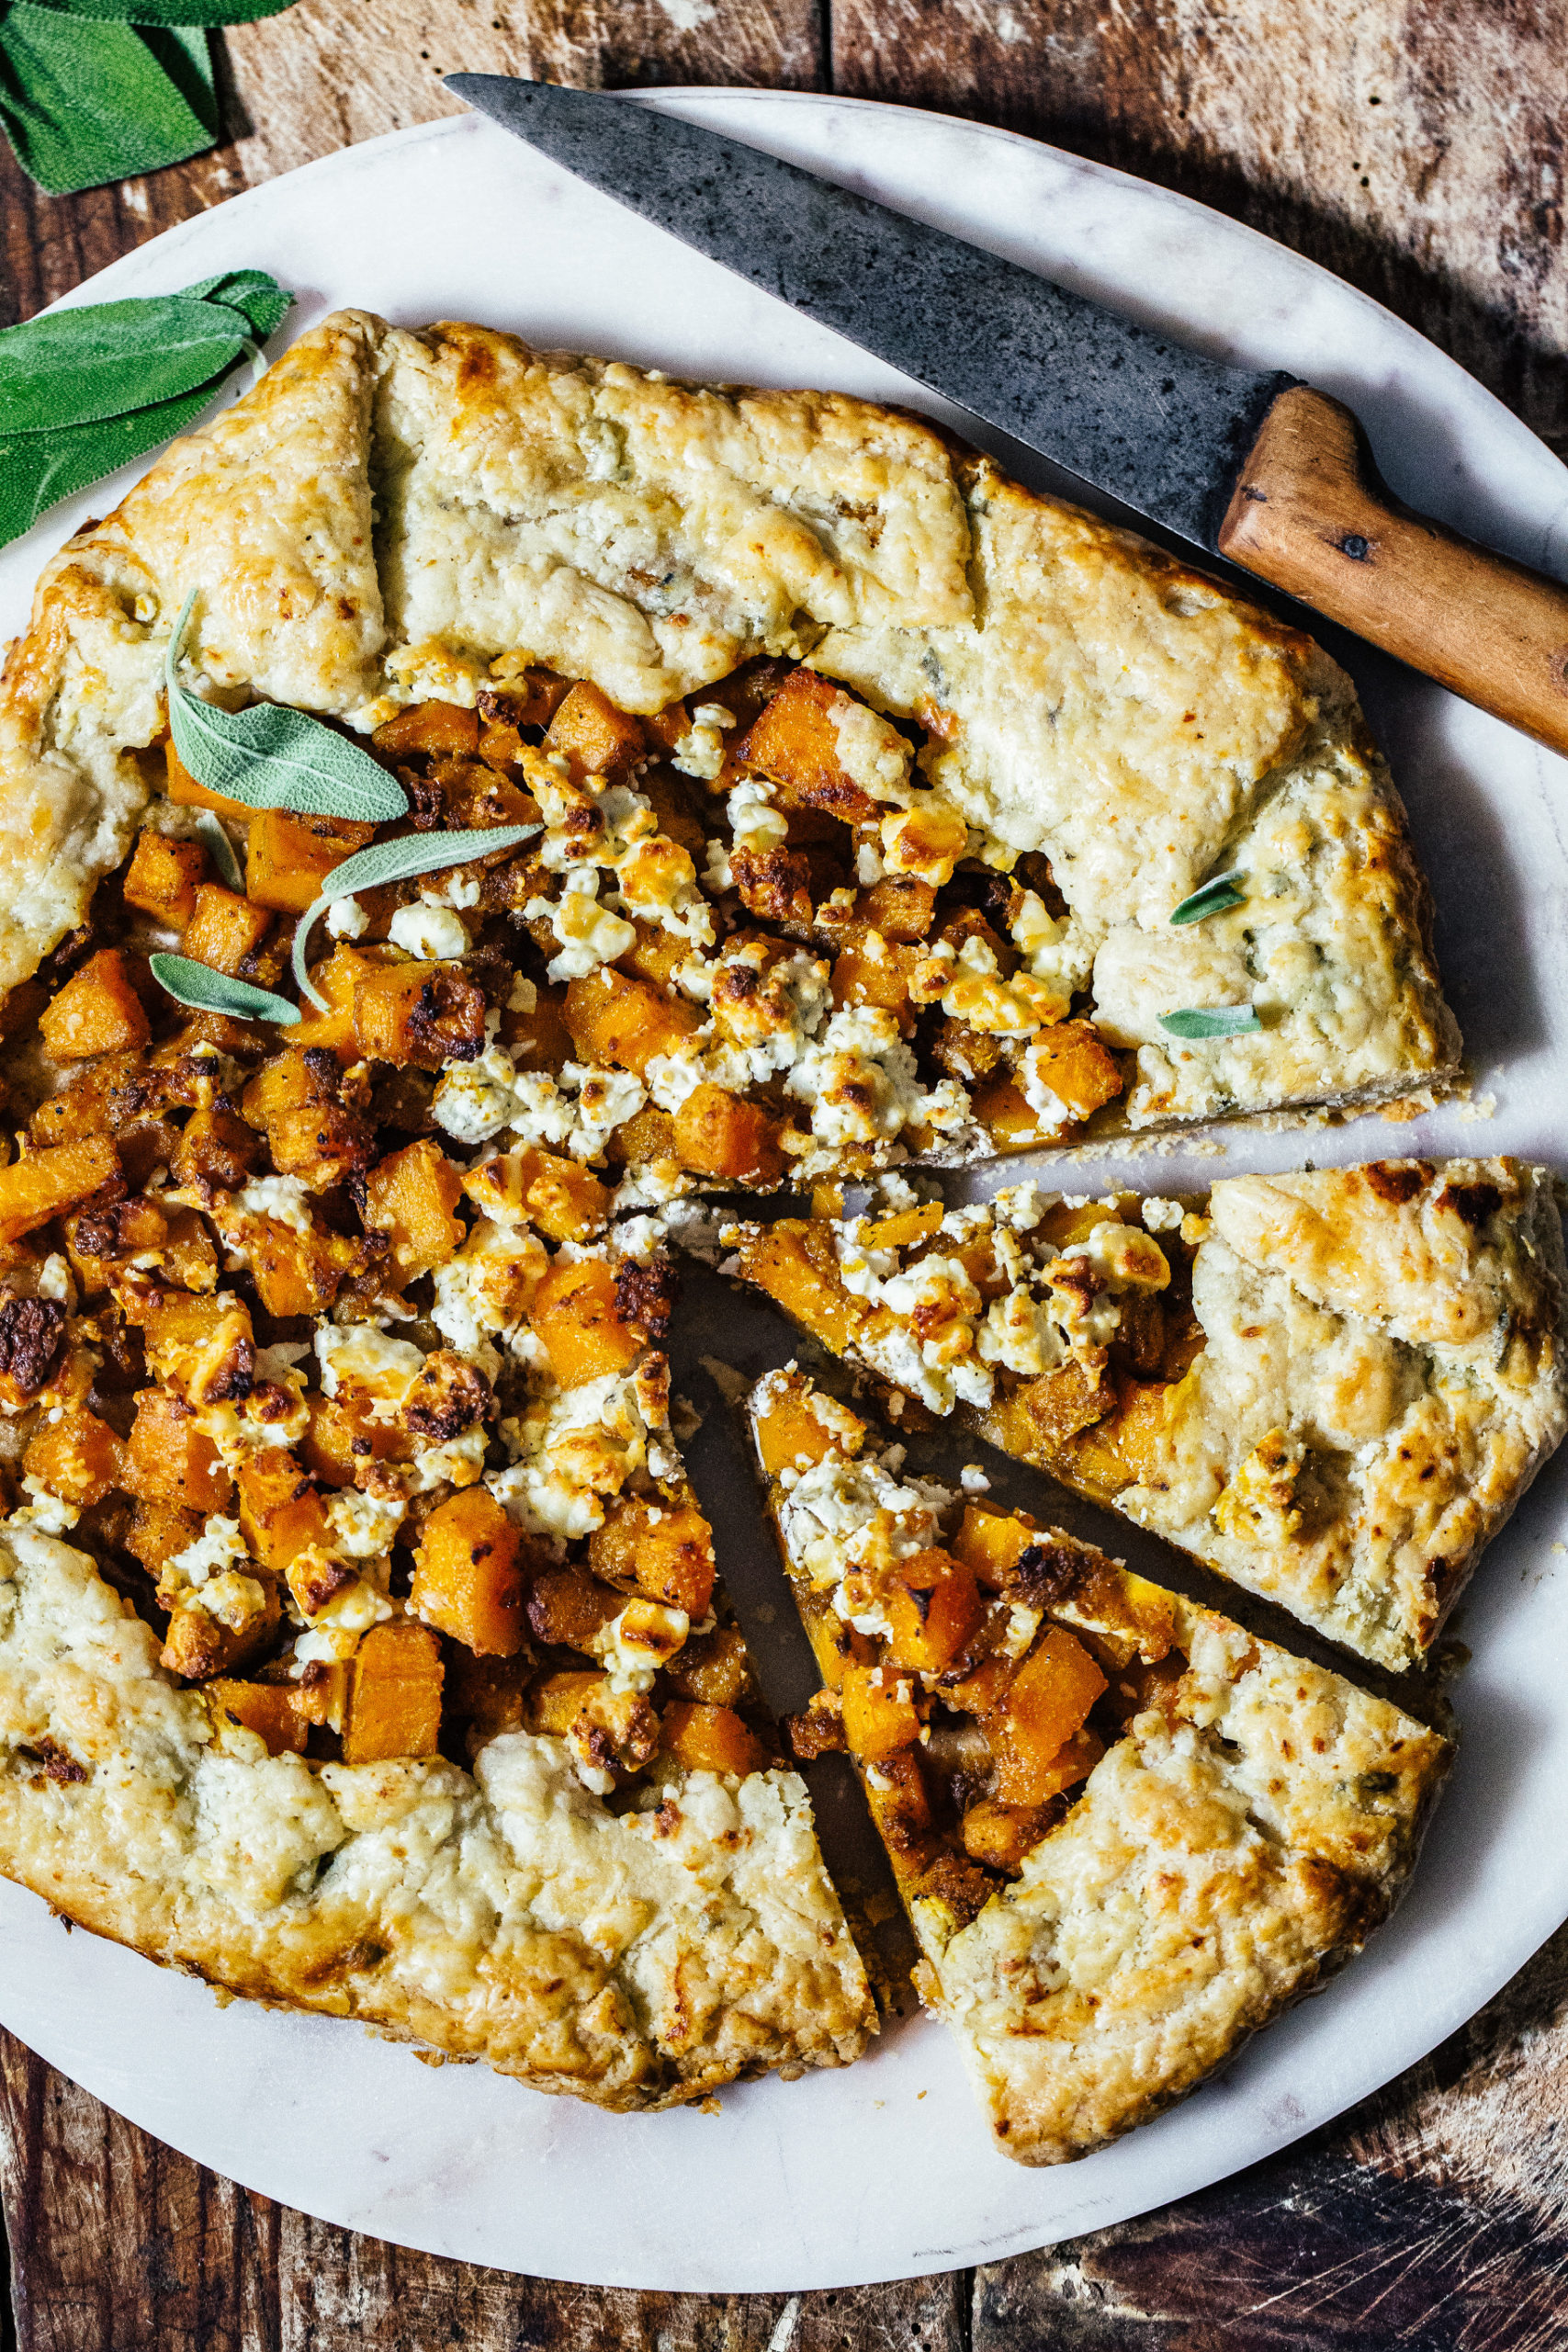 Feta & Butternut Squash Galette with Sage Pastry